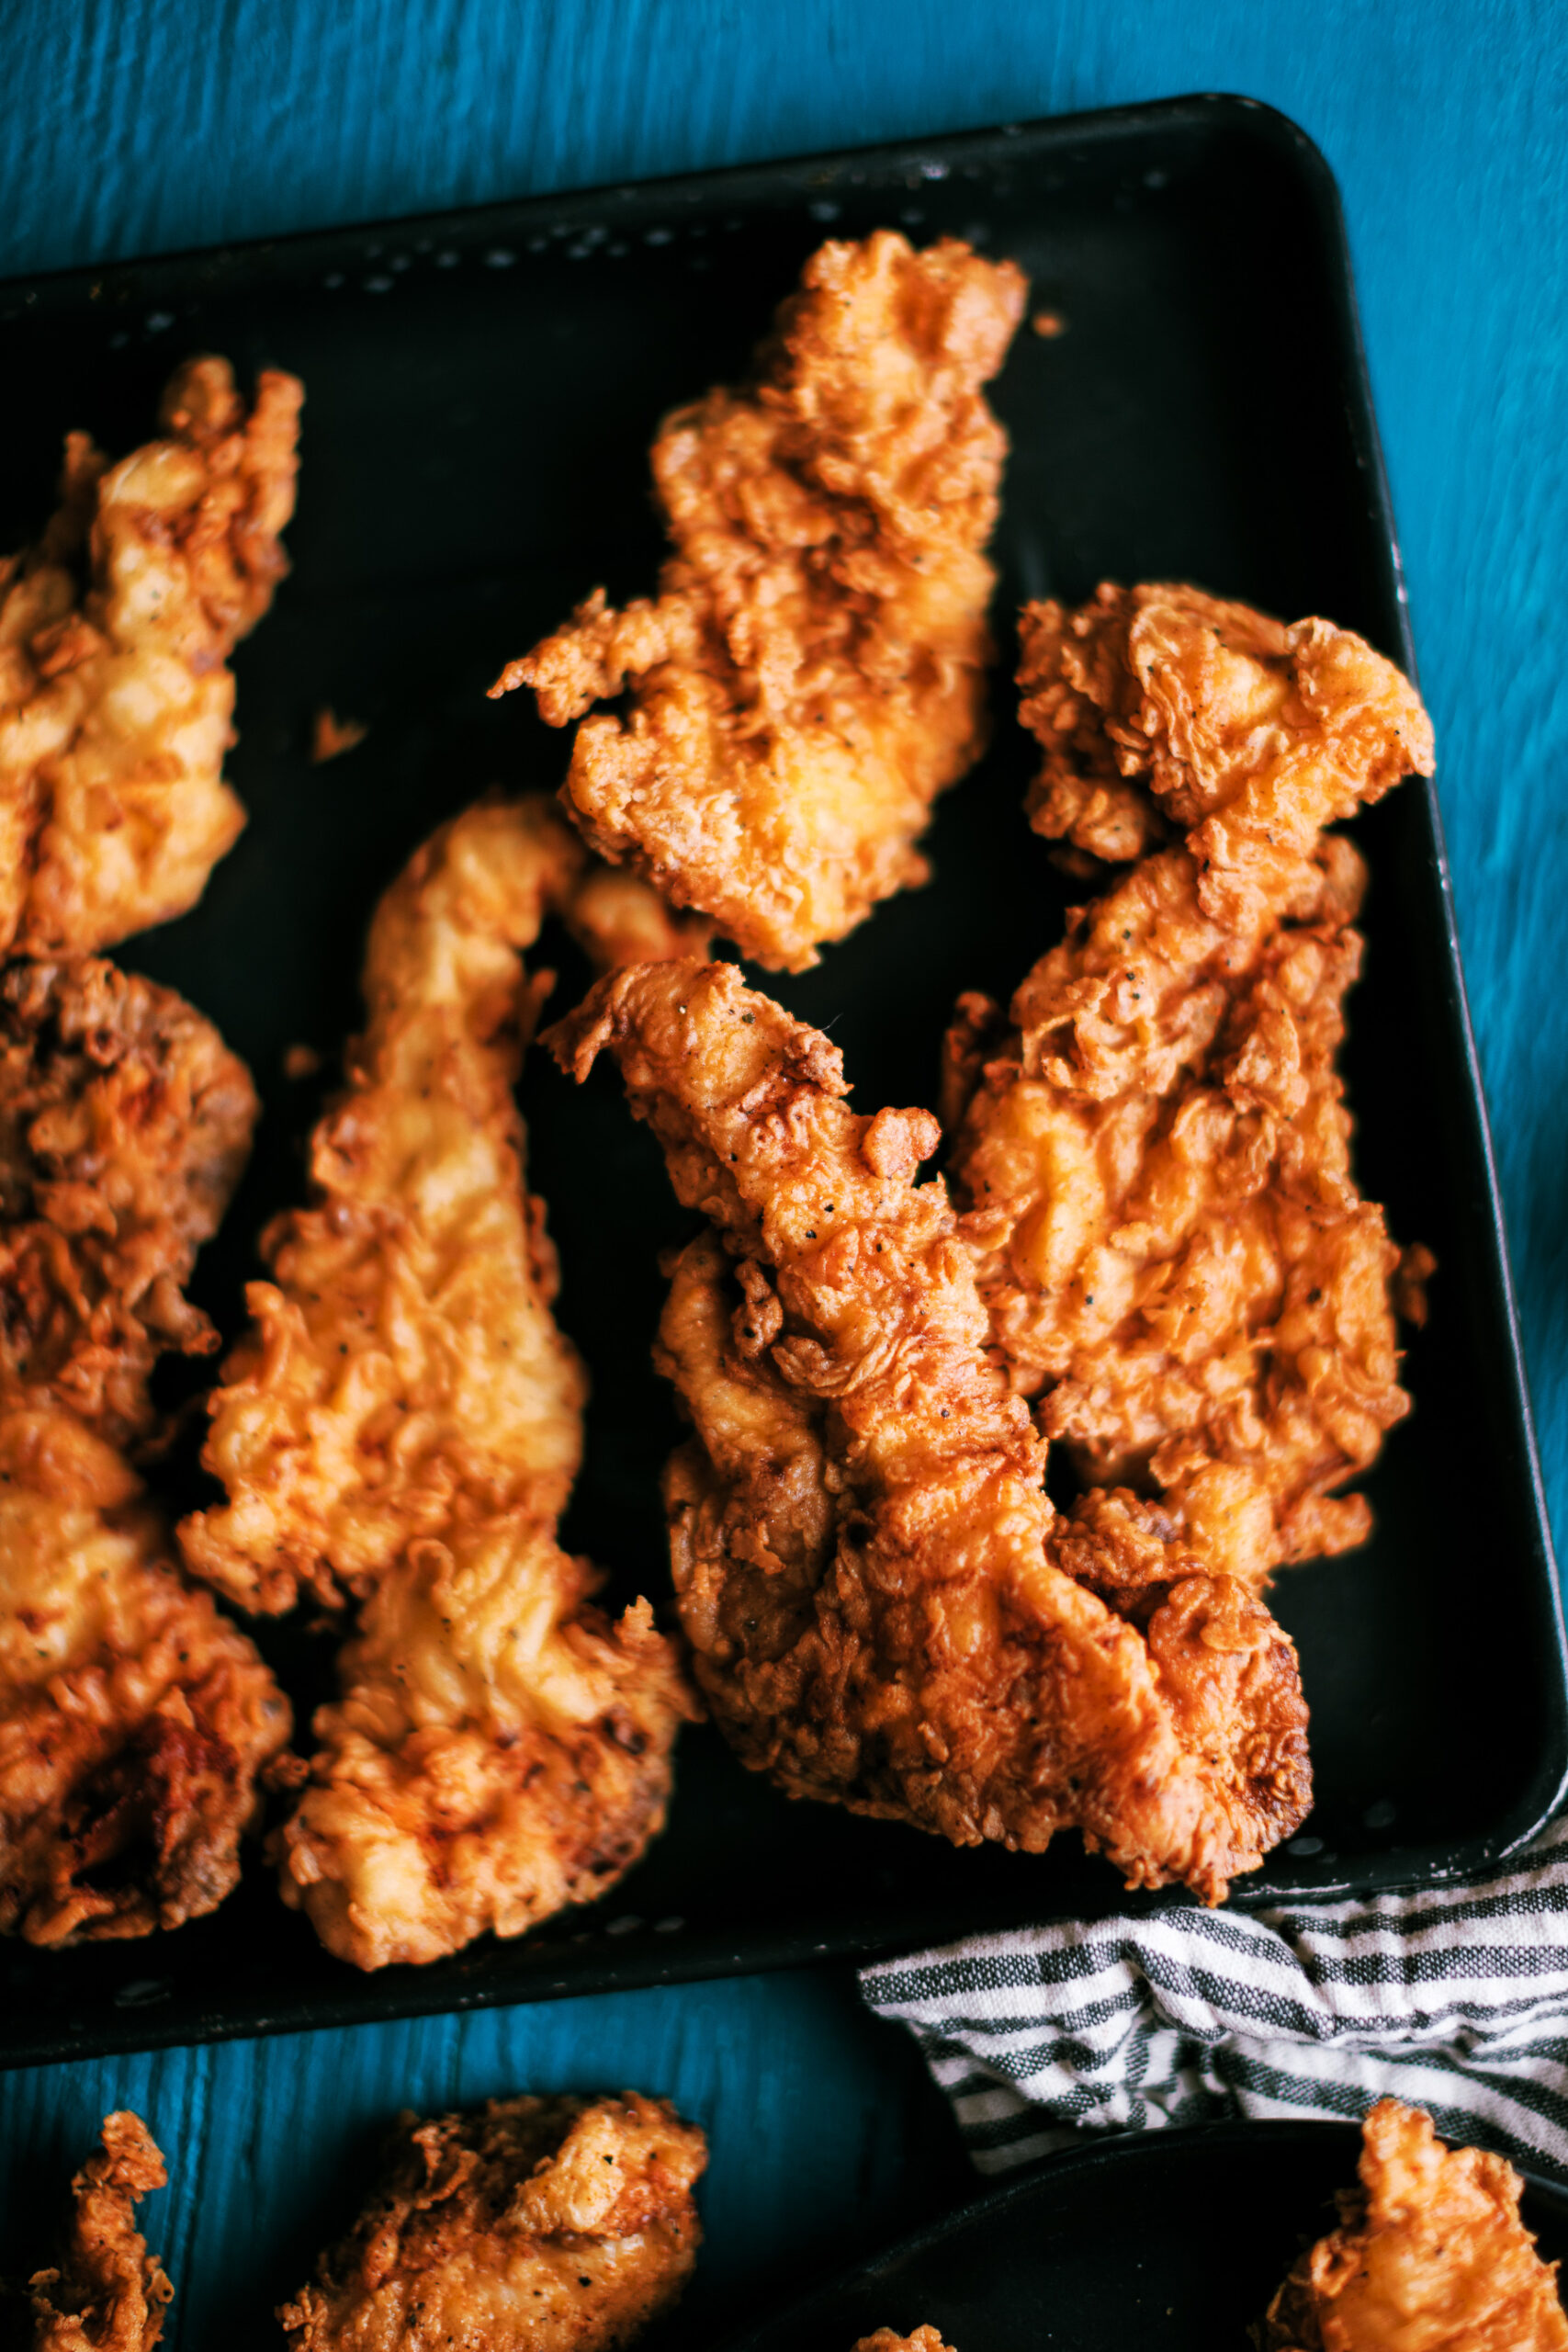 These chicken tenders are marinaded overnight in buttermilk, then dipped in a flour dredge with Cajun seasonings, and fried to perfection.